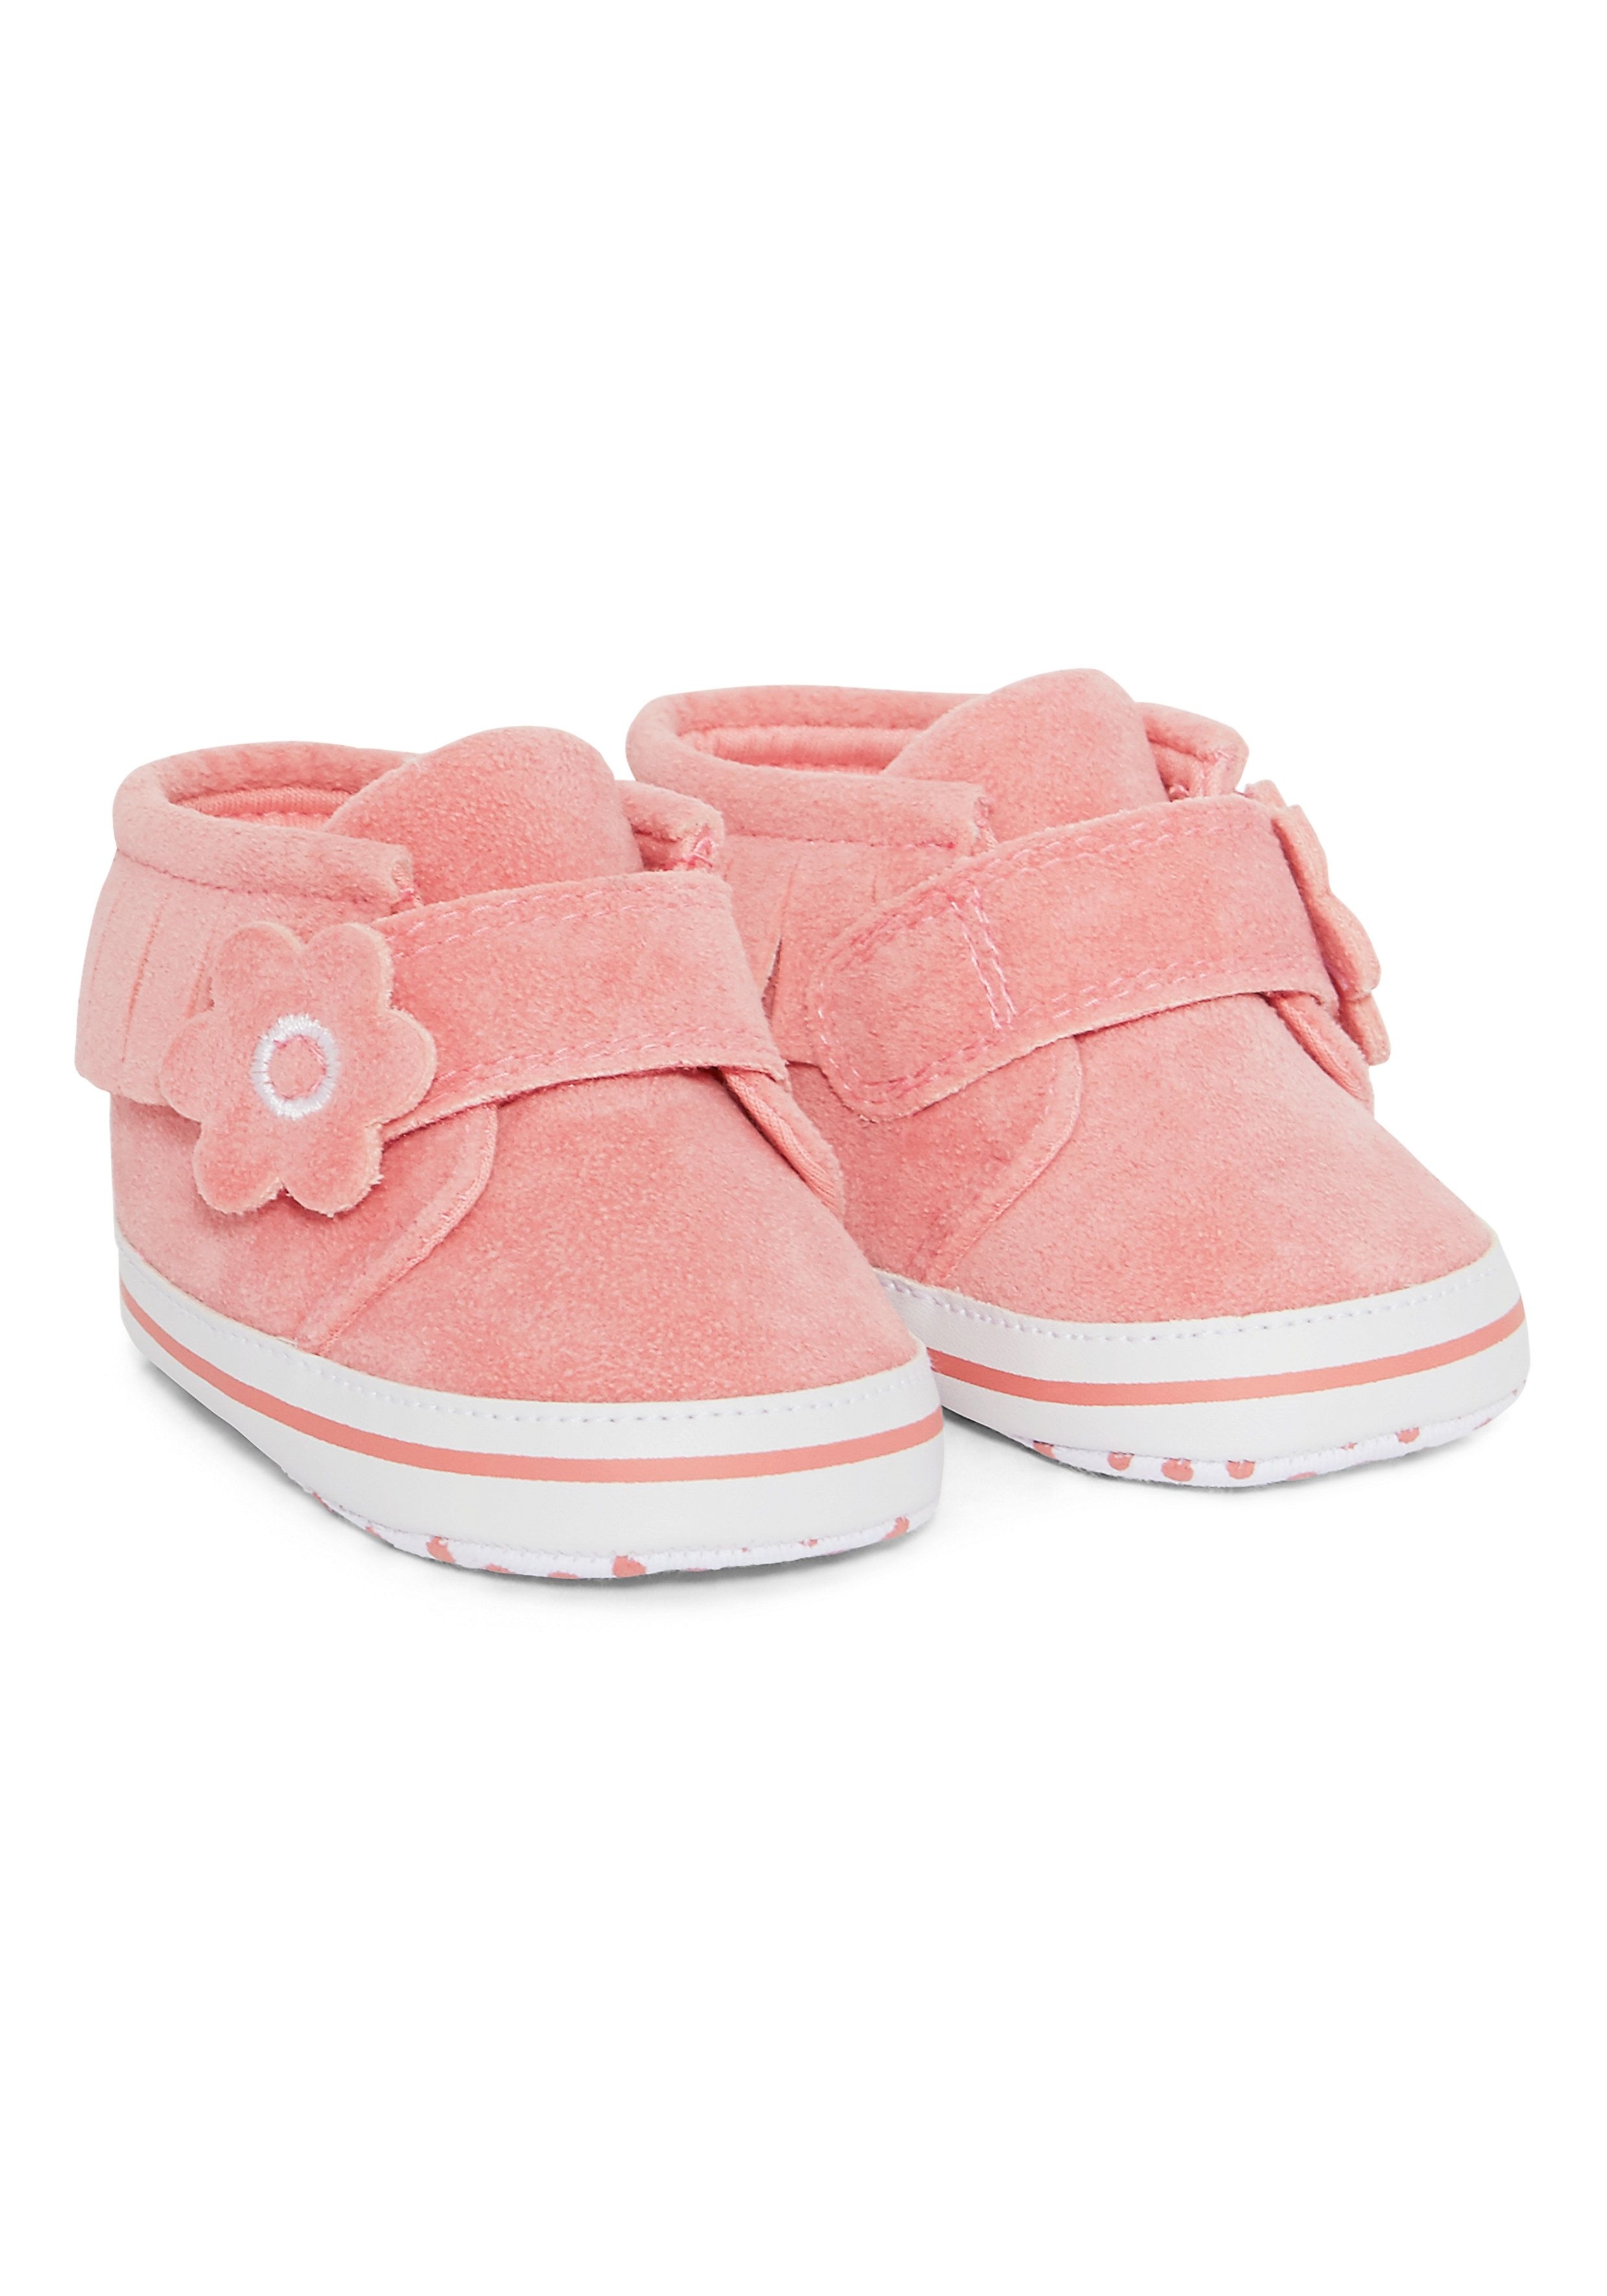 Mothercare | Pink Tassle Corsage Shoes